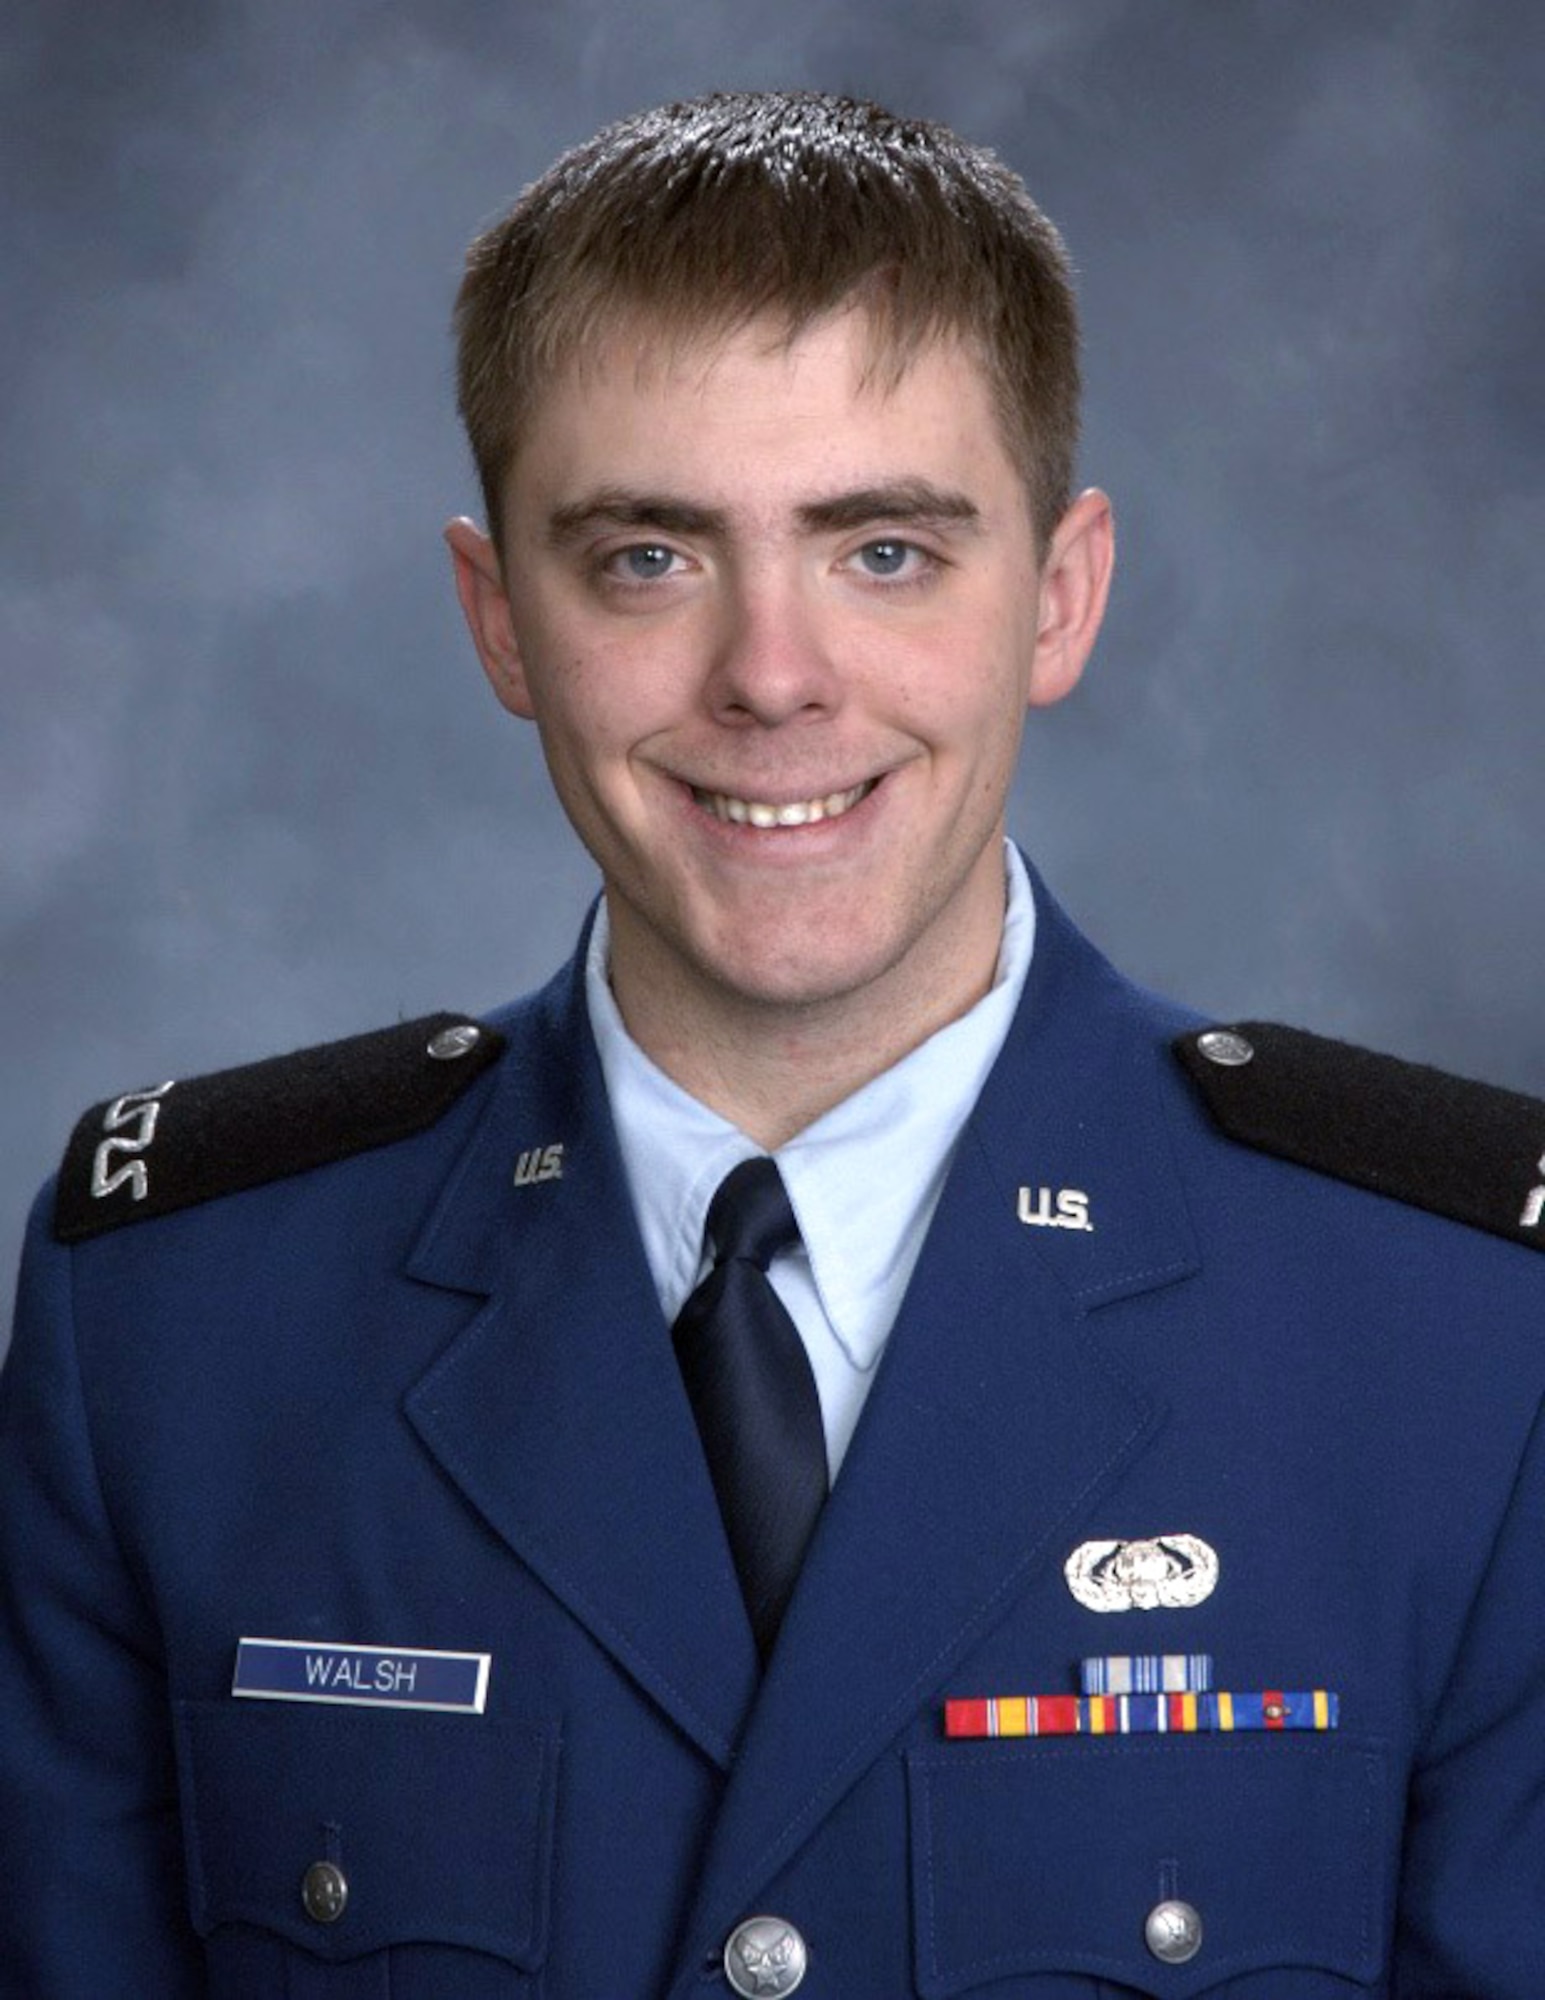 Cadet 4th Class James Walsh, pictured here, was found dead in the Air Force Academy Cadet Area Feb. 9, 2013. (U.S. Air Force photo)